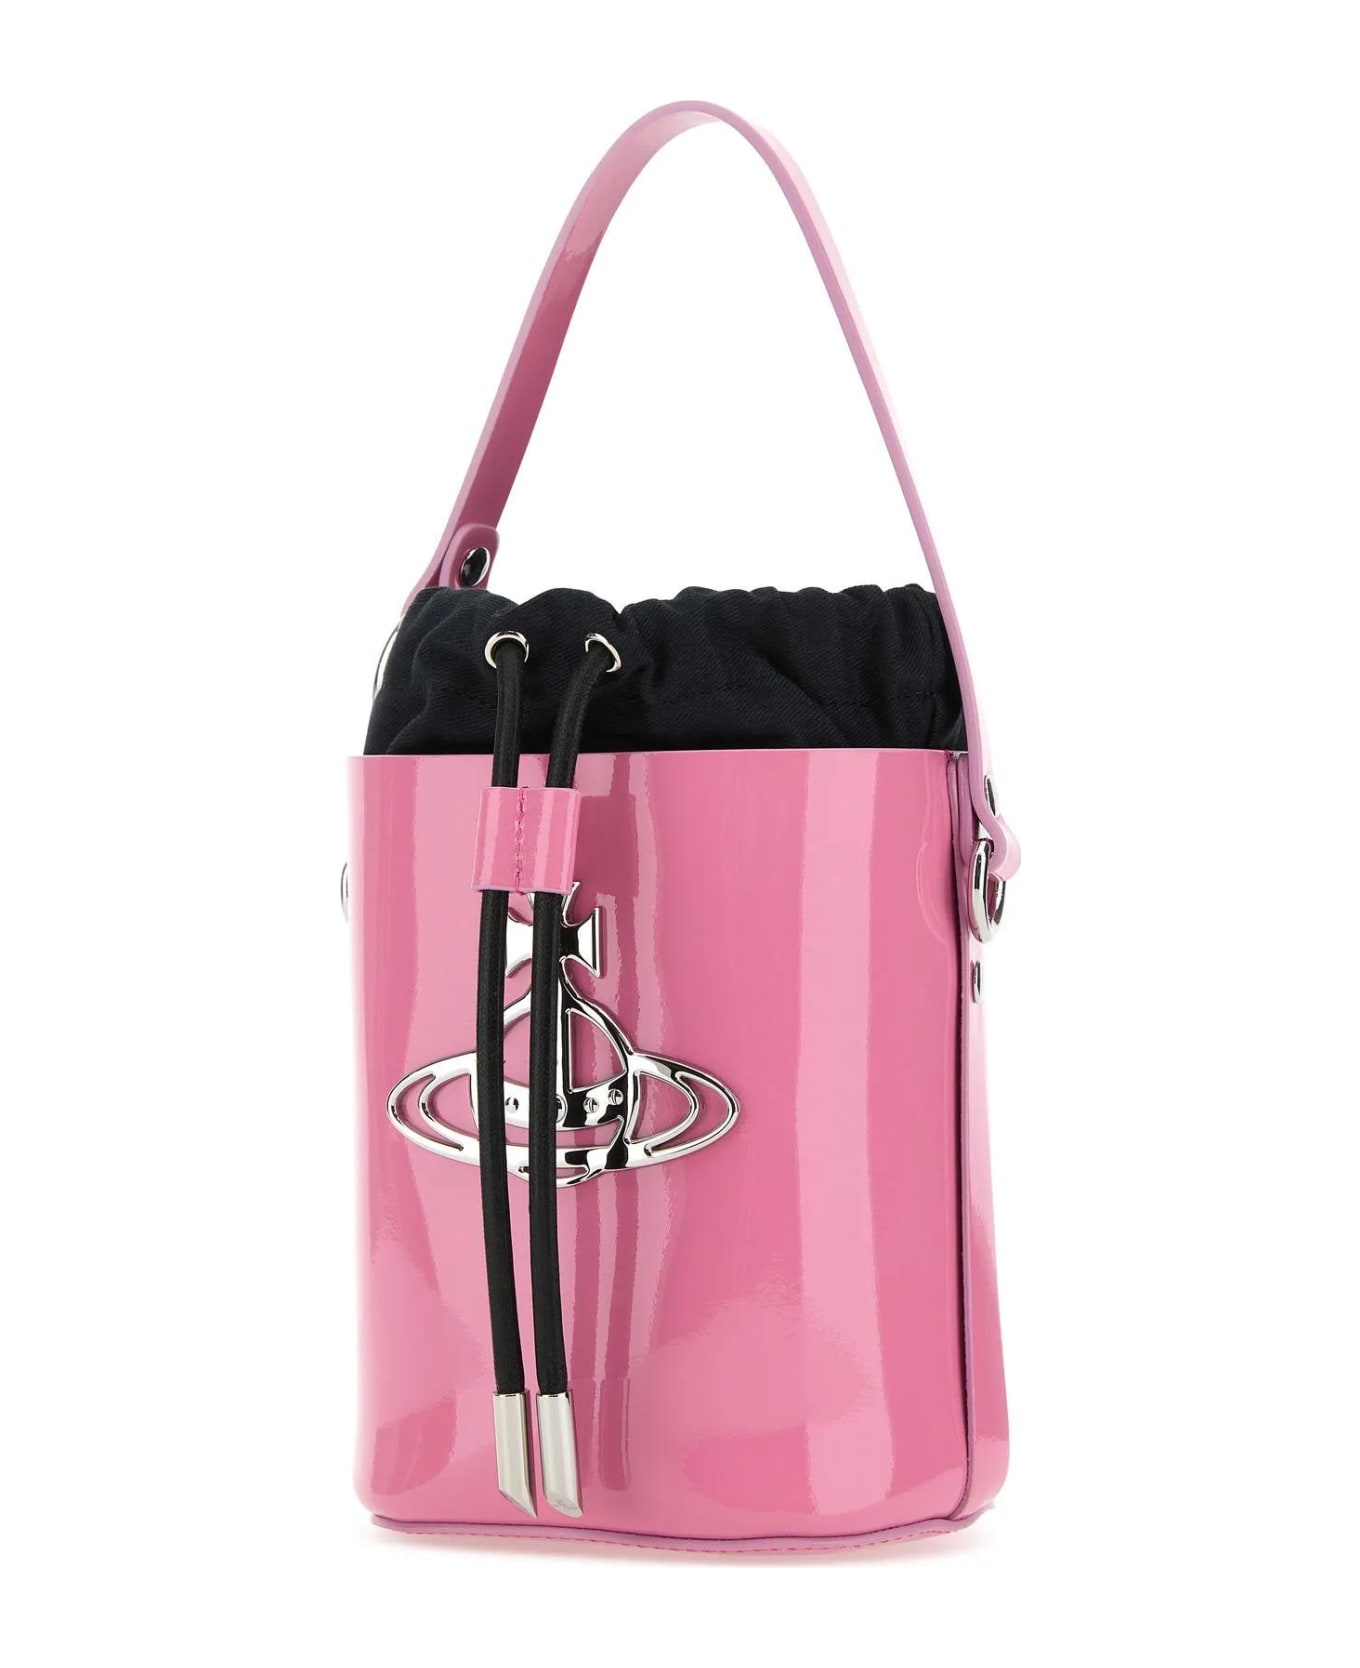 Vivienne Westwood Pink Leather Small Daisy Bucket Bag - PINK トートバッグ